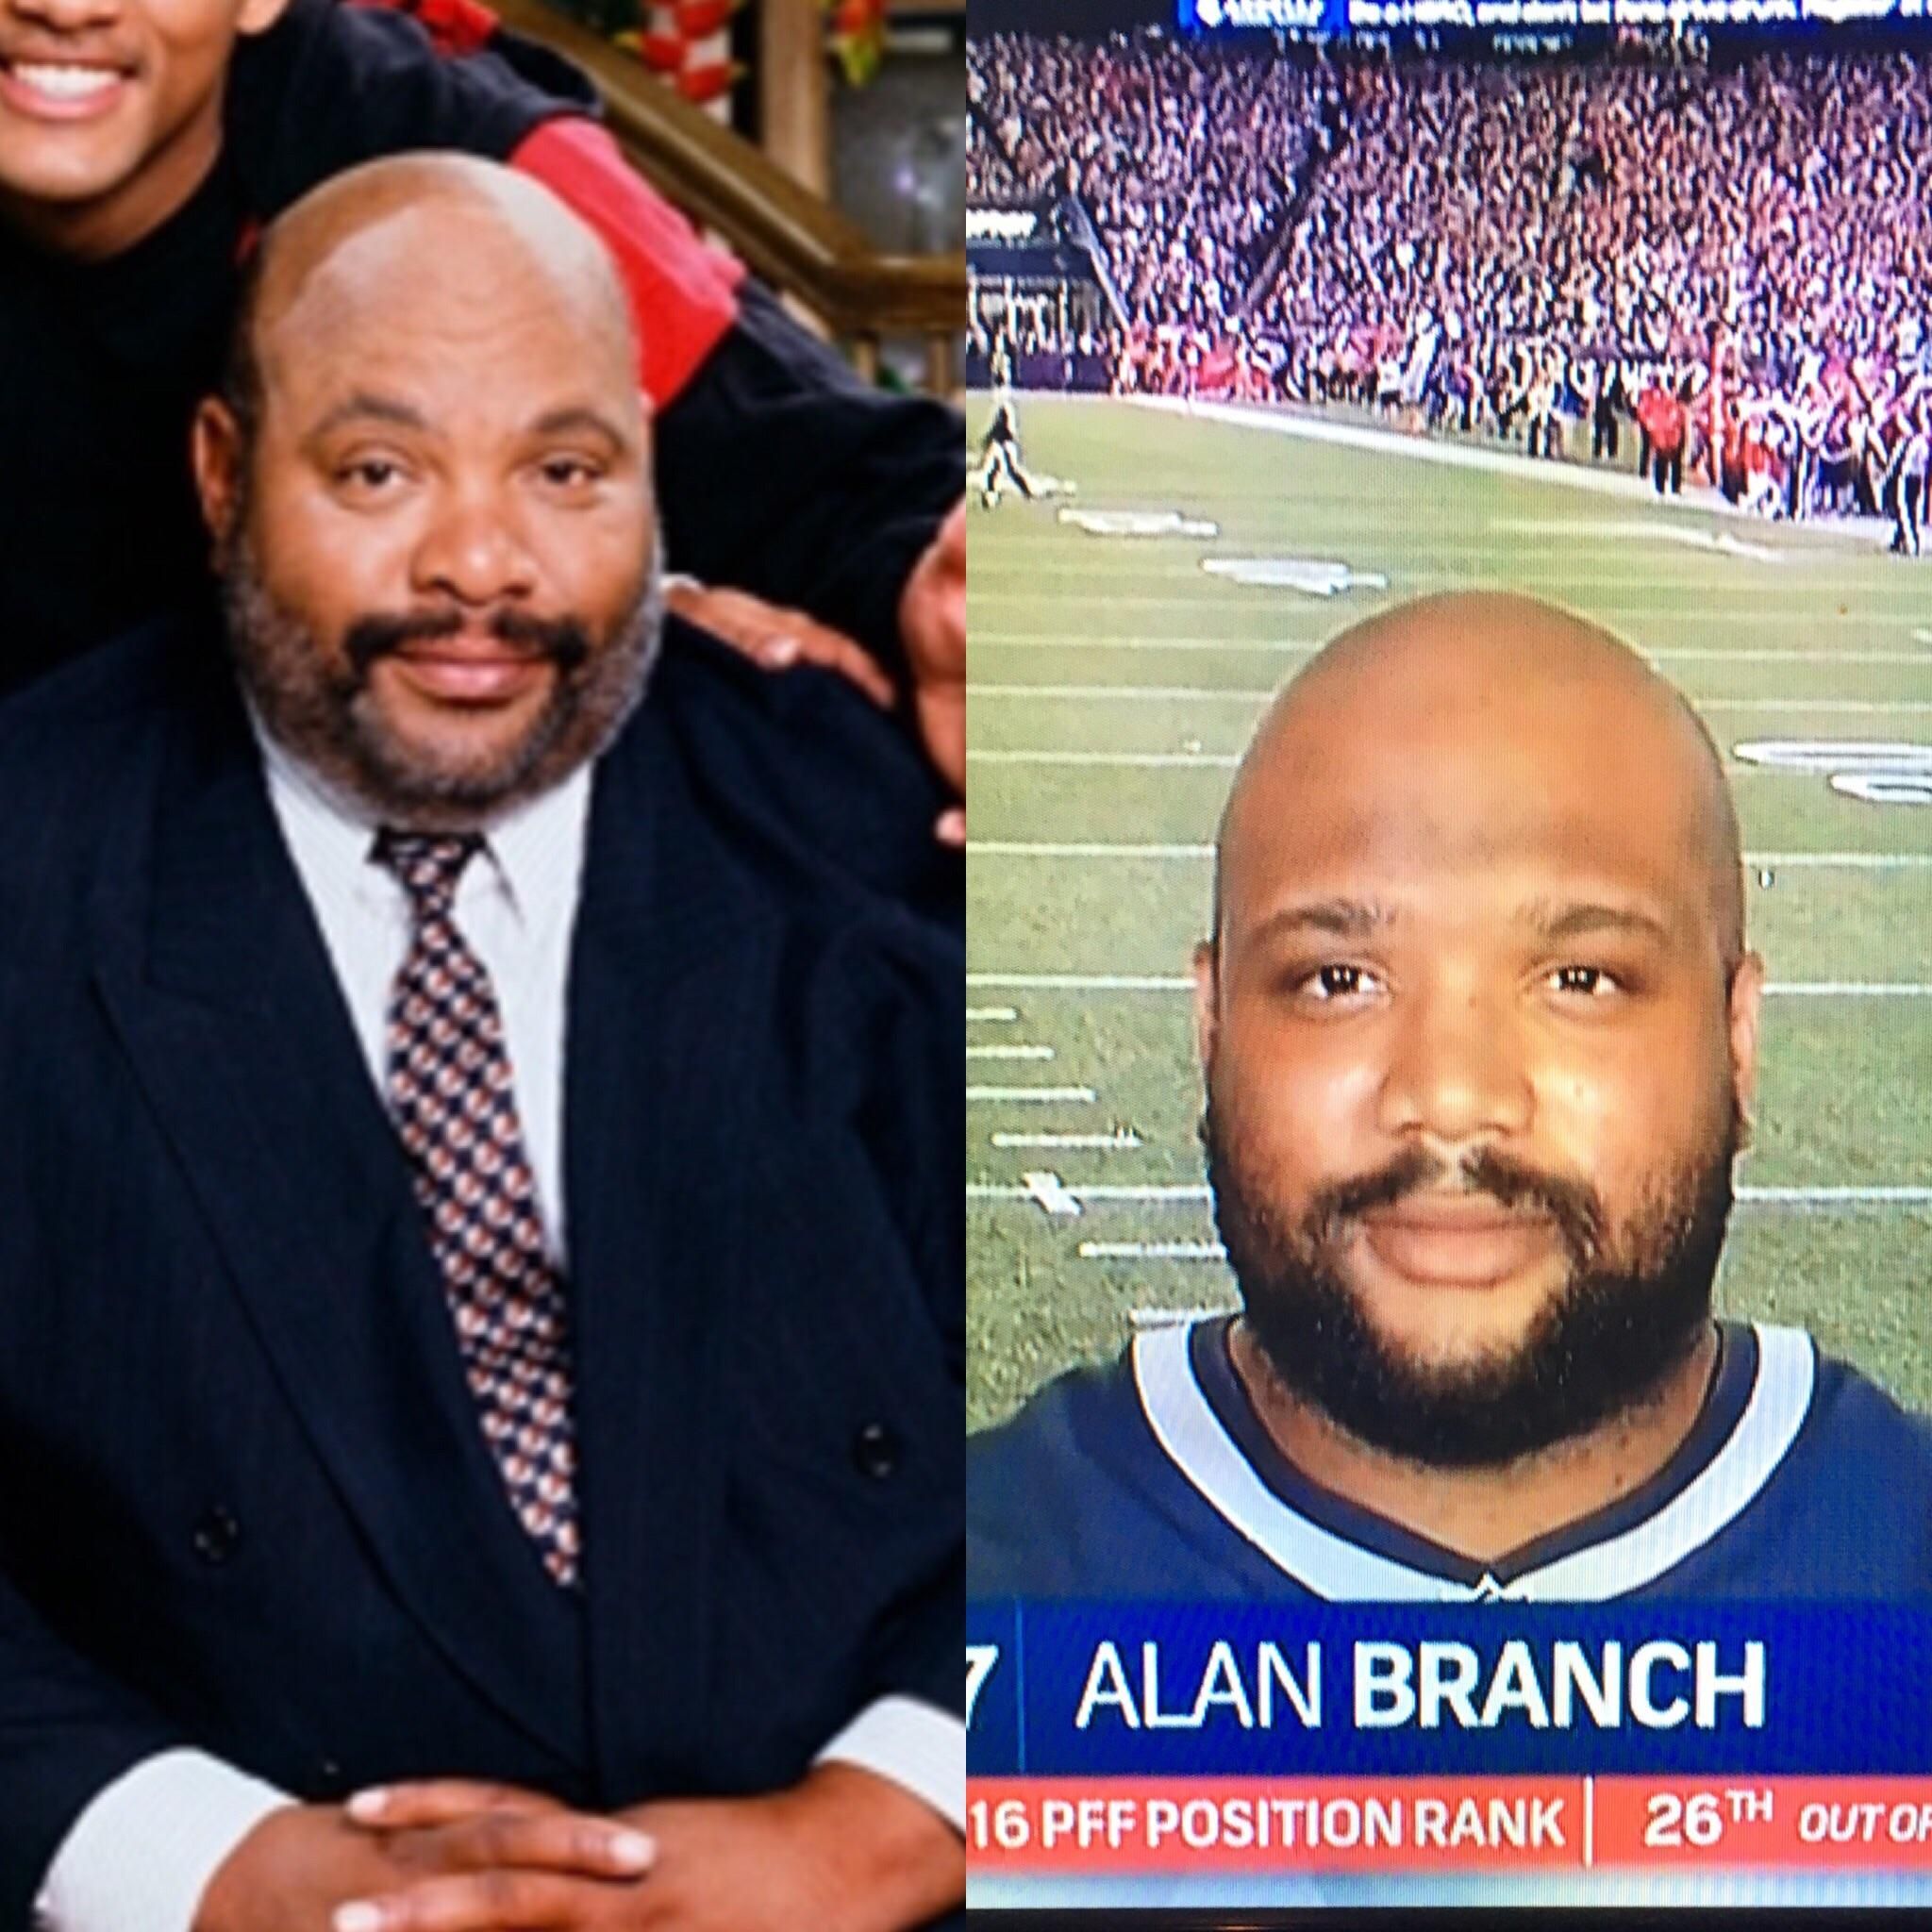 Apparently Uncle Phil came back from the dead to play for the Patriots...